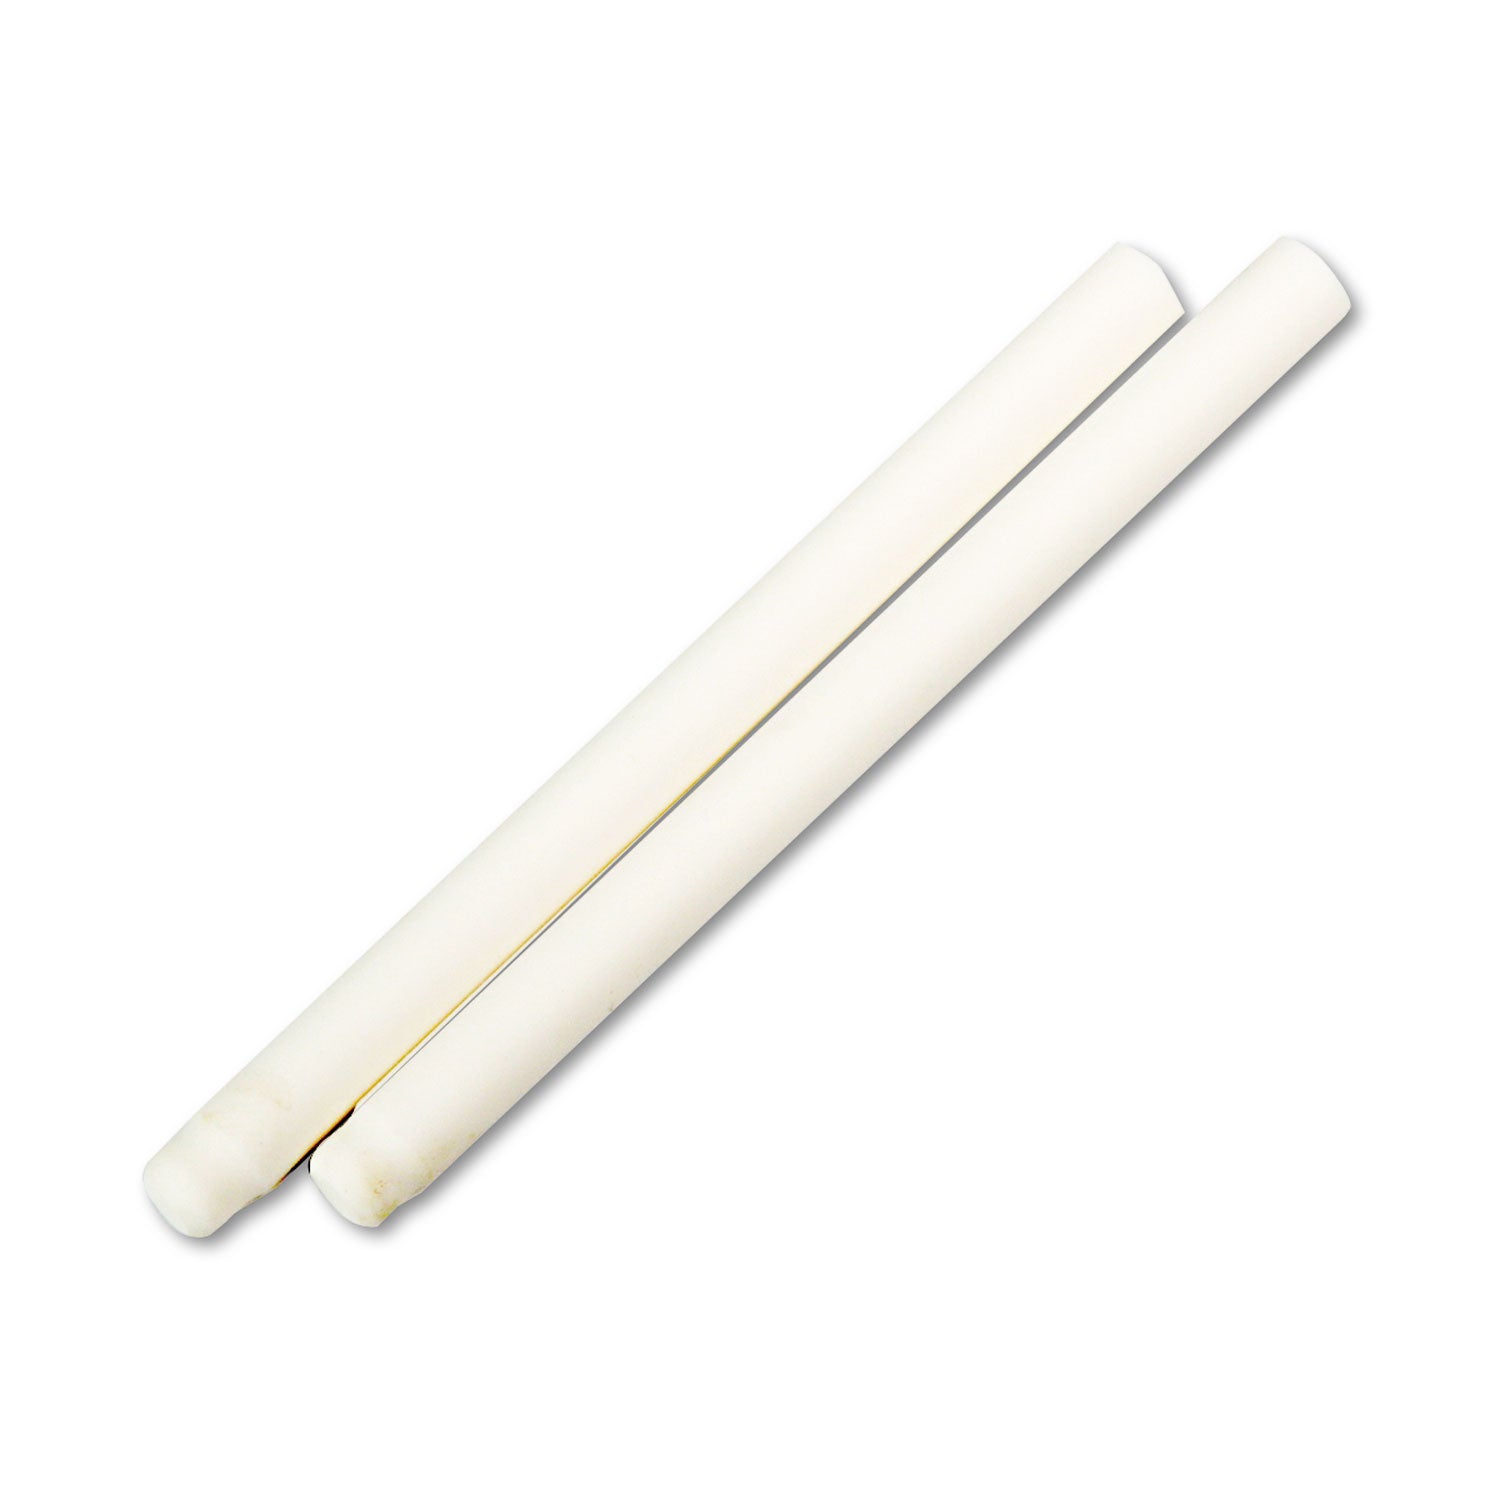 Clic Eraser Refills for Pentel Clic Erasers, Cylindrical Rod, White, 2/Pack - 